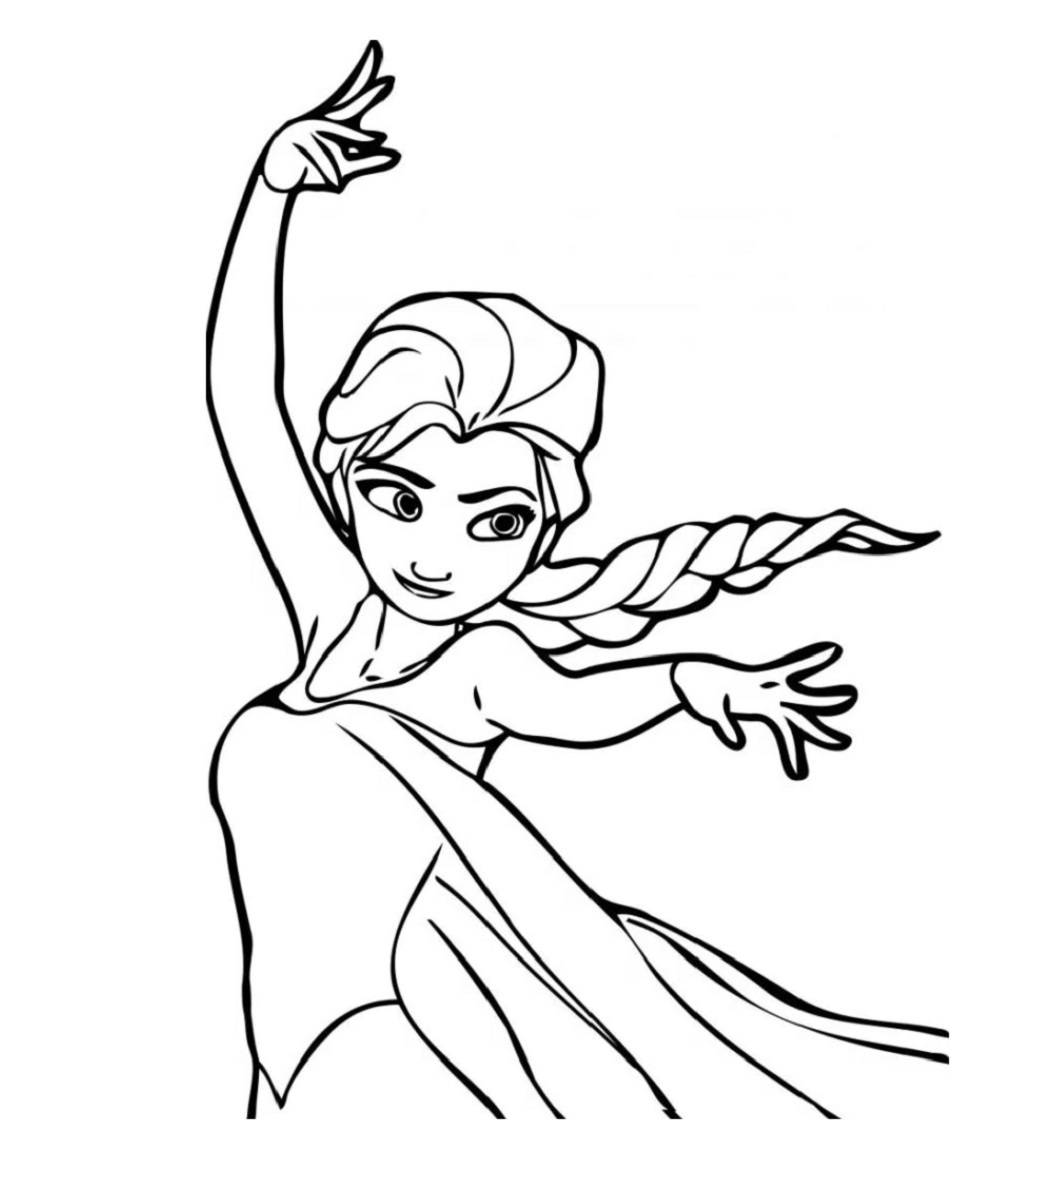 Printable Pretty Frozen ElsA Coloring Page for kids.